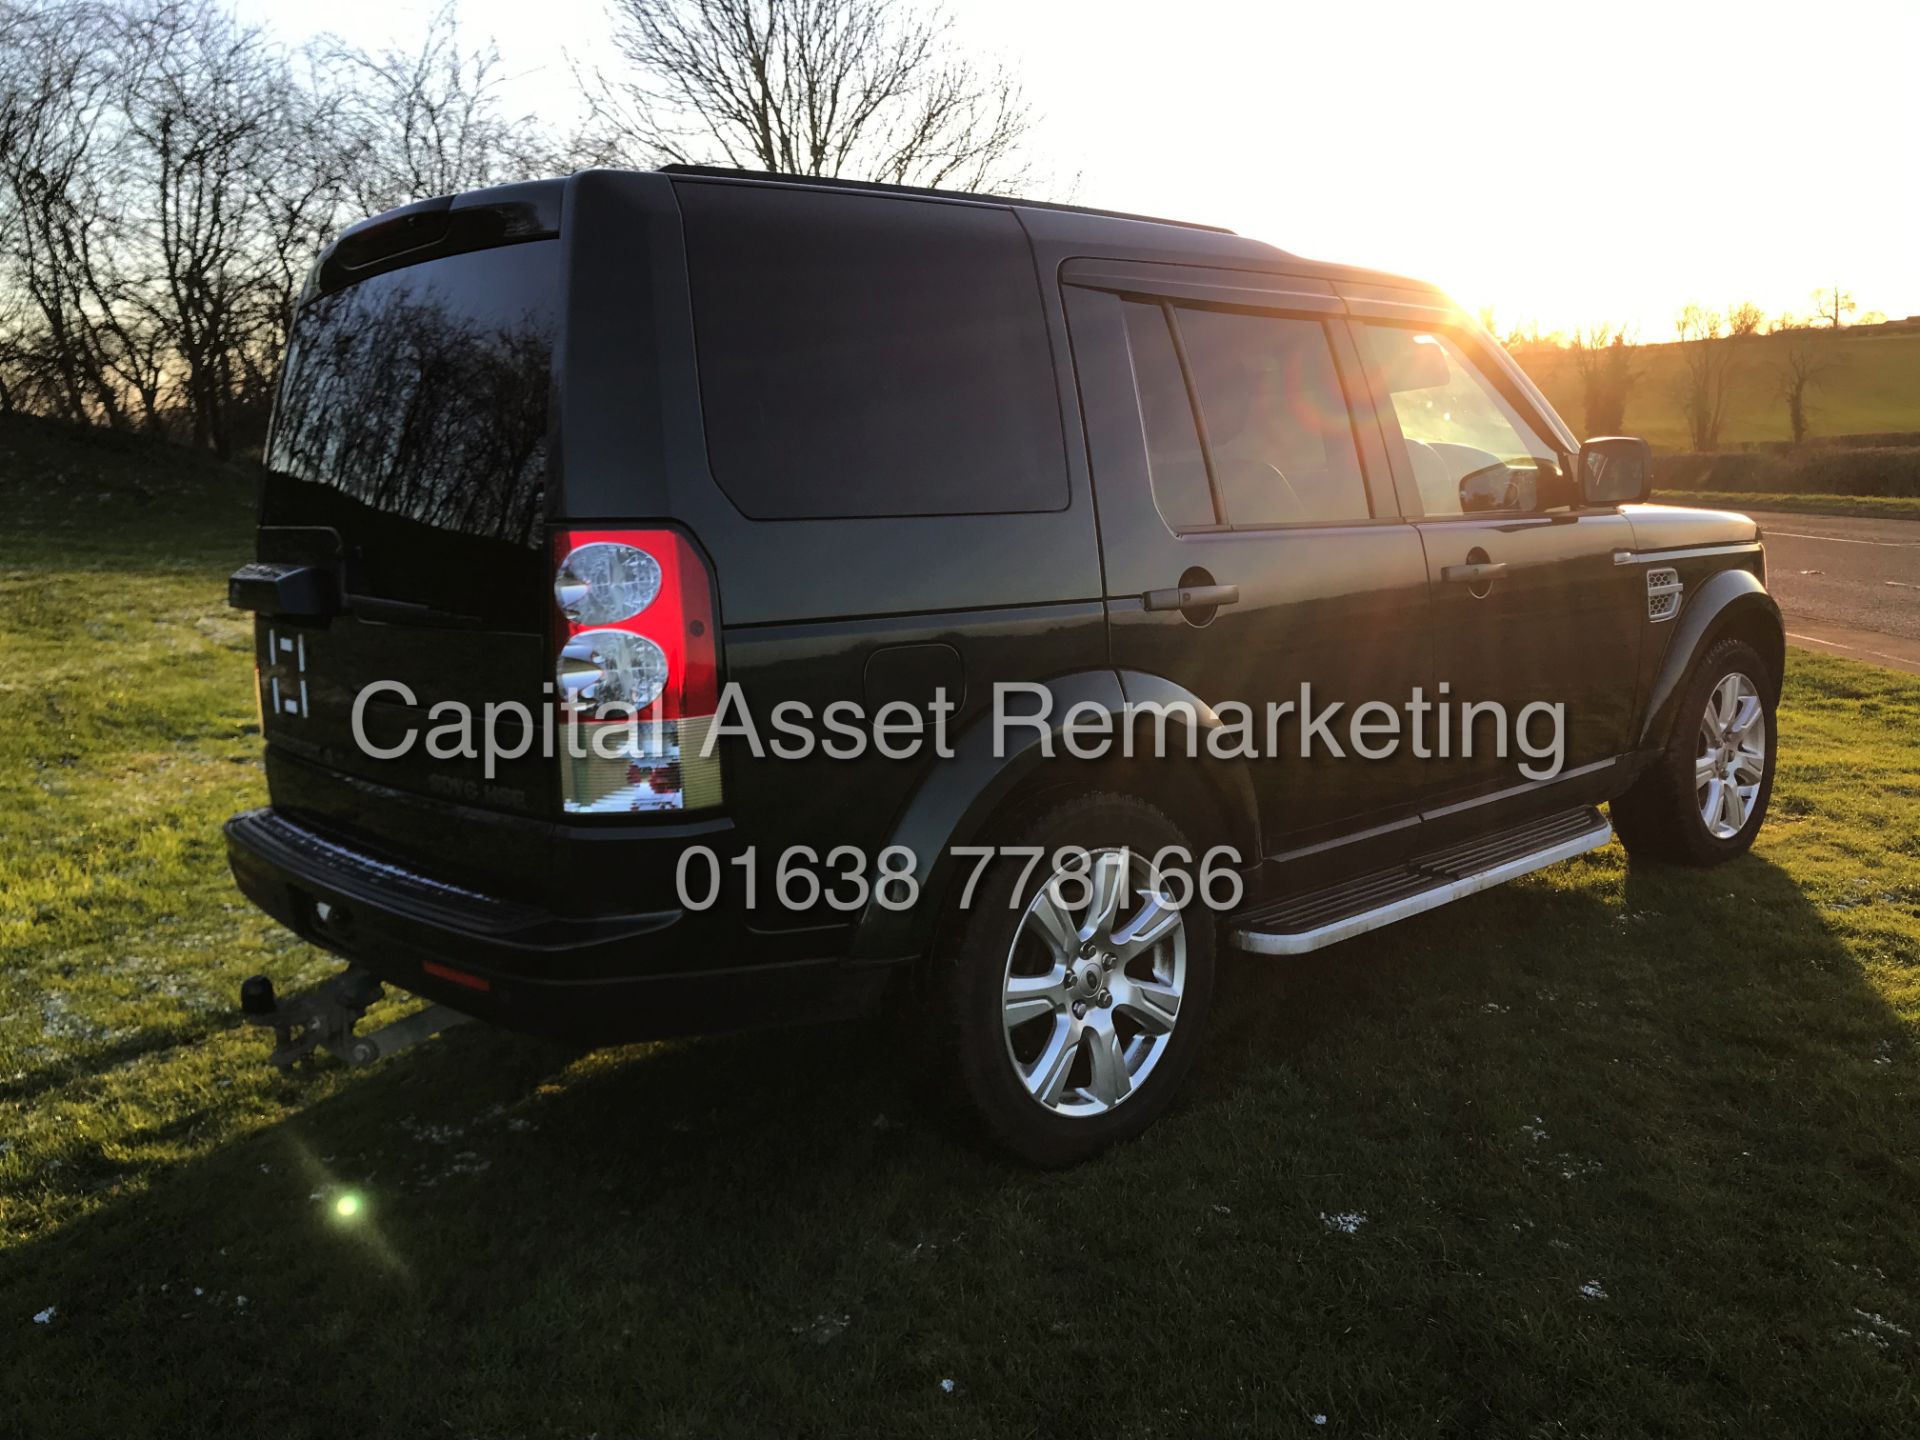 (ON SALE) LAND ROVER DISCOVERY 4 "HSE" 3.0 SDV6 AUTO (13 REG) 7 SEATER - TOP SPEC - SAT NAV -LEATHER - Image 6 of 31